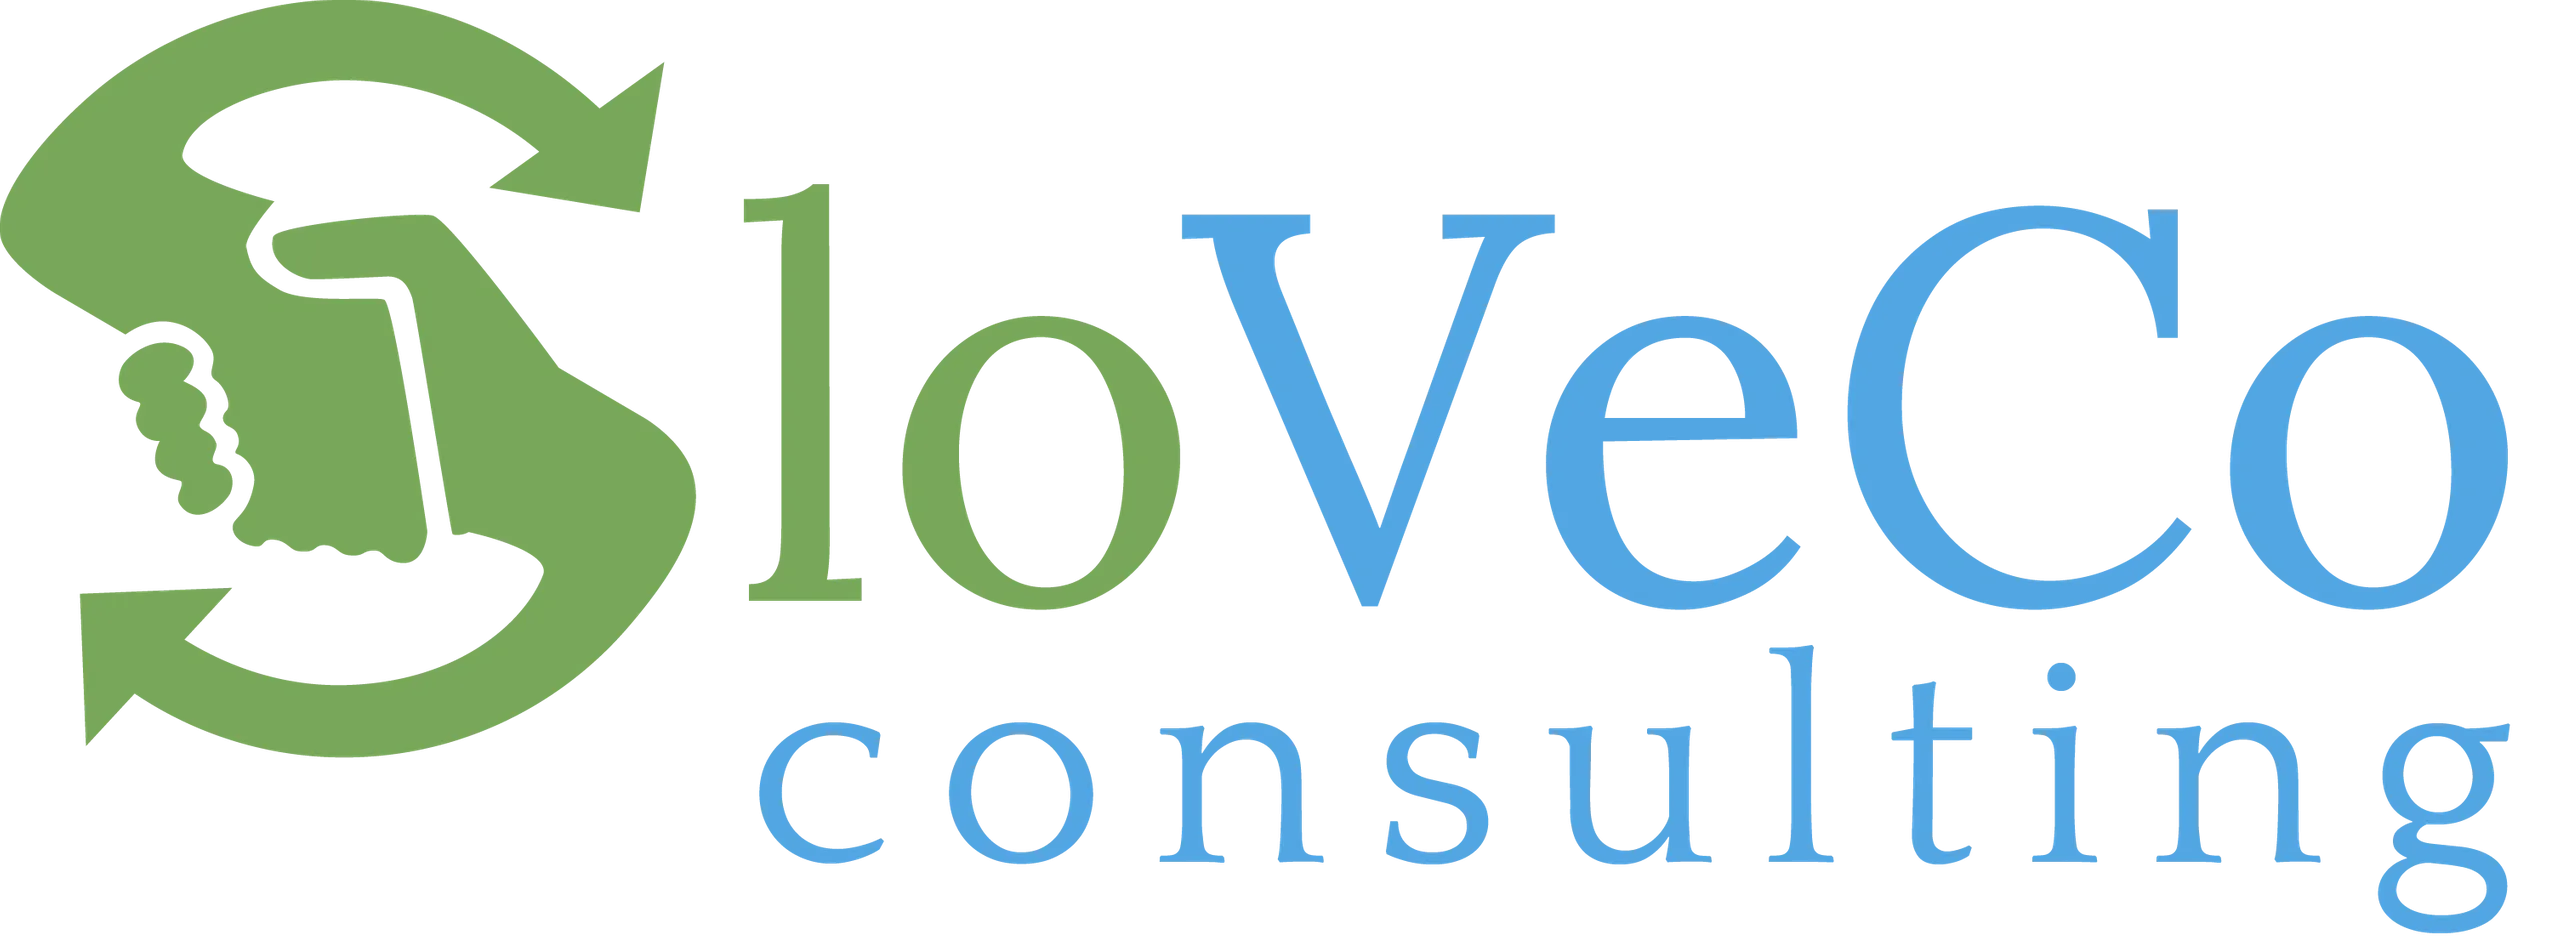 Sloveco Consulting BV